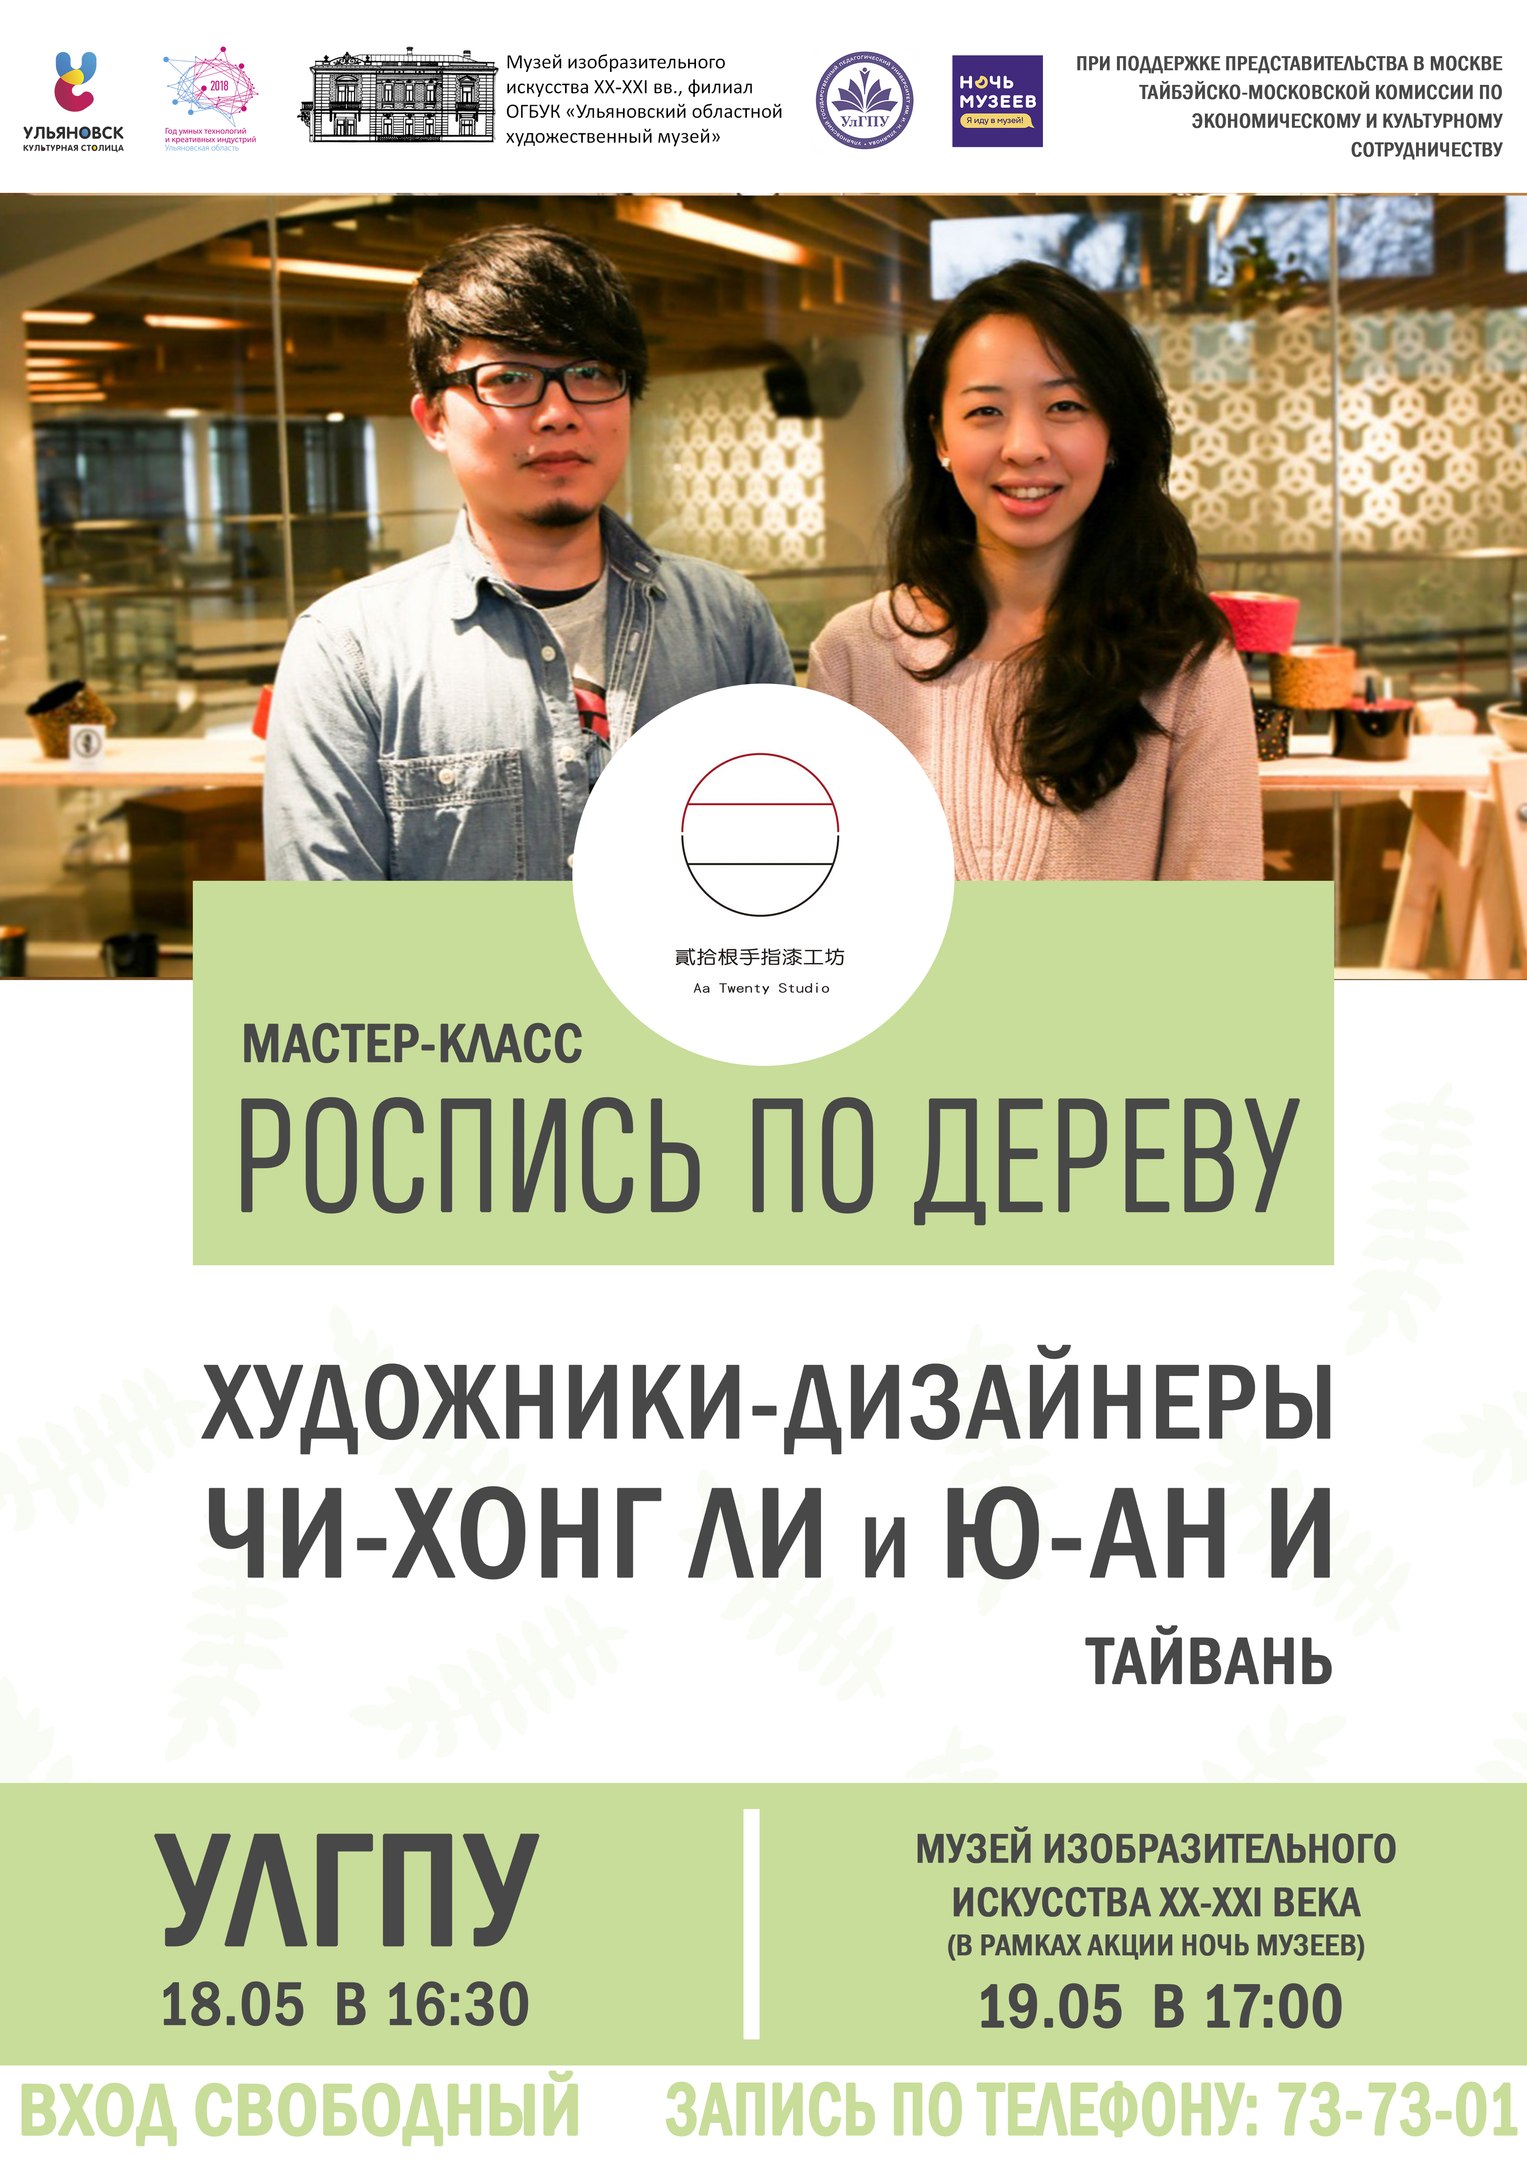 Taiwanese artisans to hold lacquer workshops in 3 Russian cities